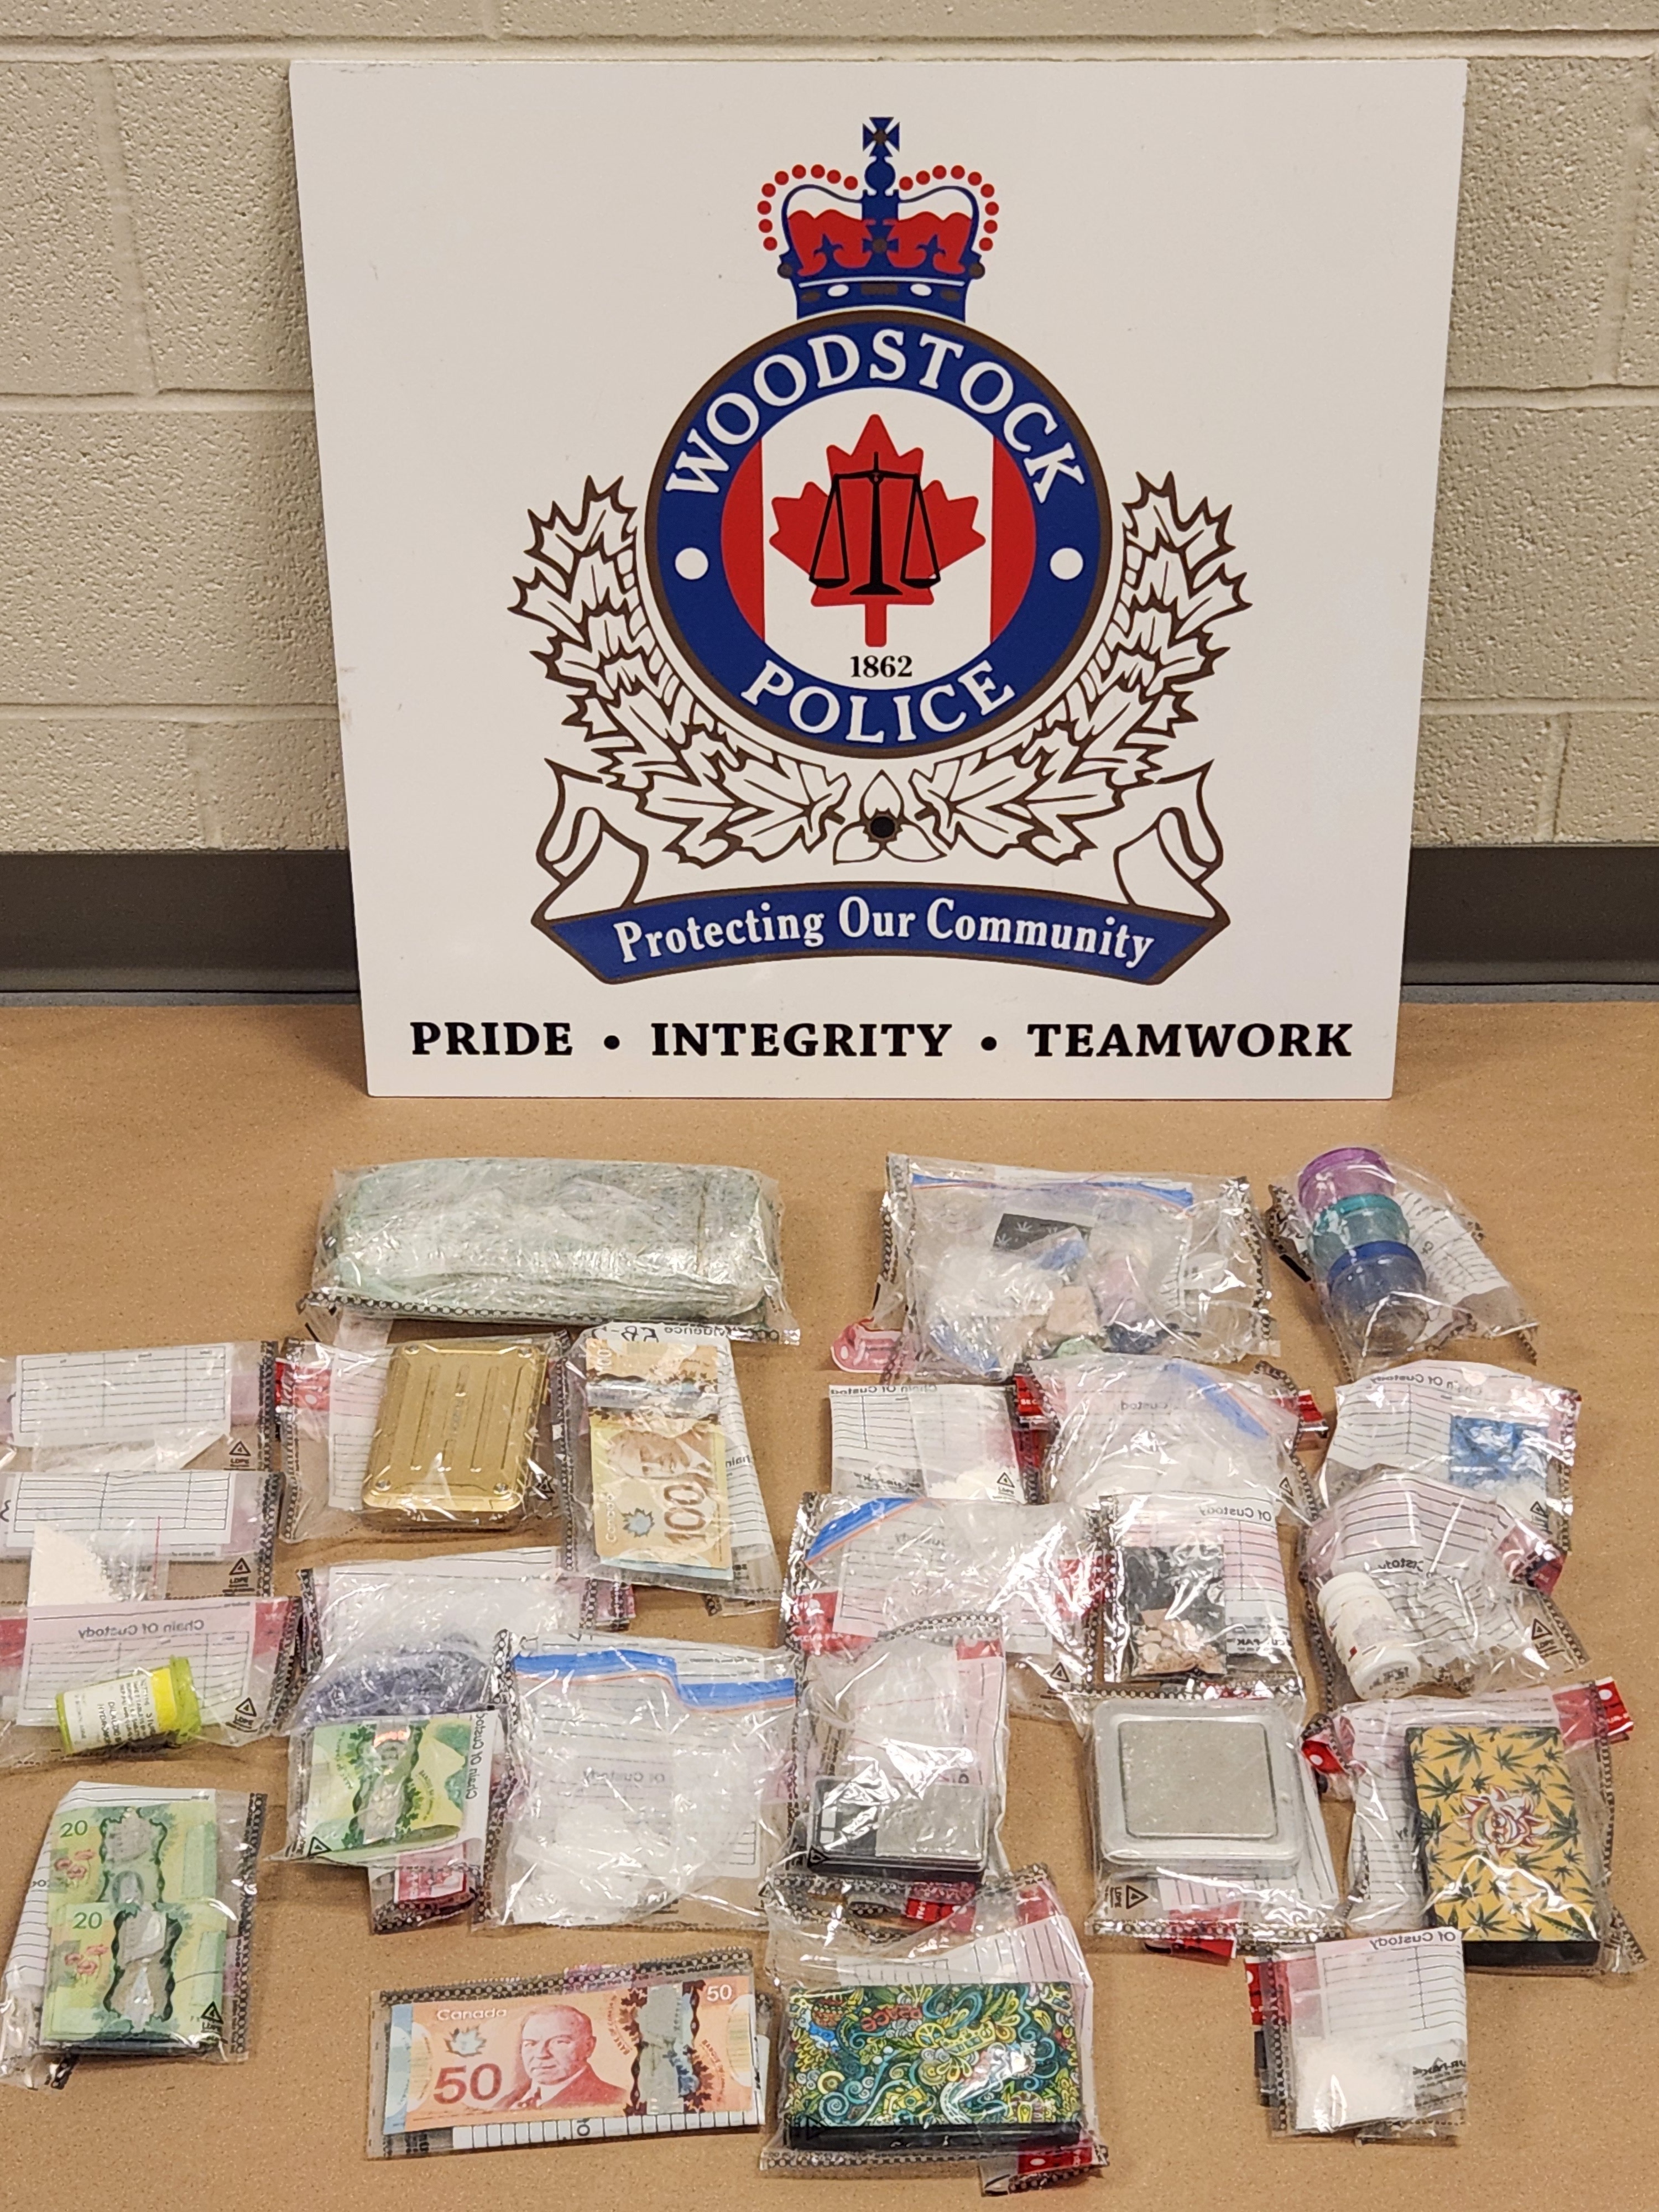 Woodstock Police Service logo behind drugs and cash in evidence bags